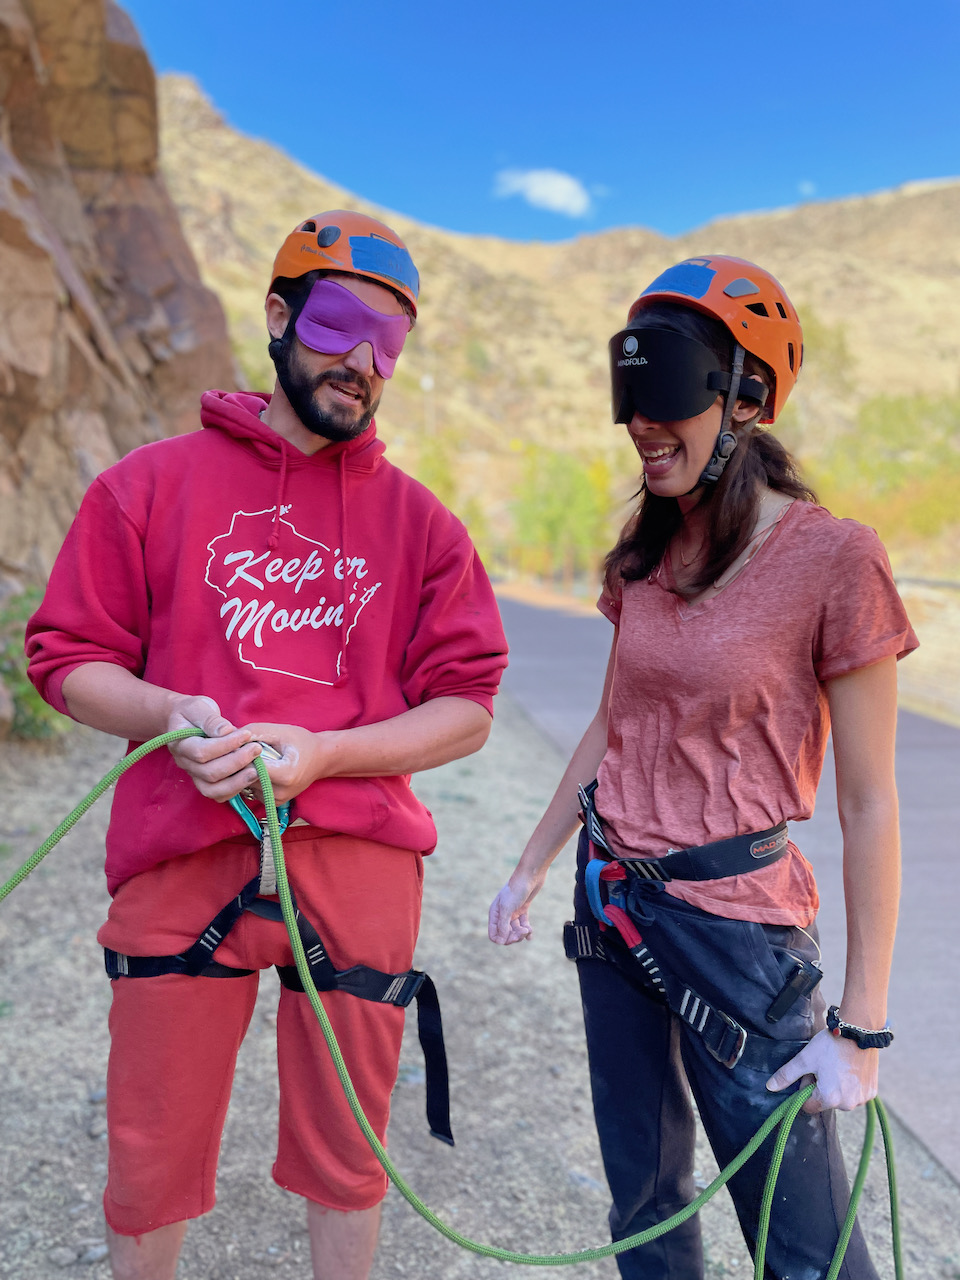 Dan H (left) and Annalise (right) grin as they hold the rope and prepare to belay another student climber.